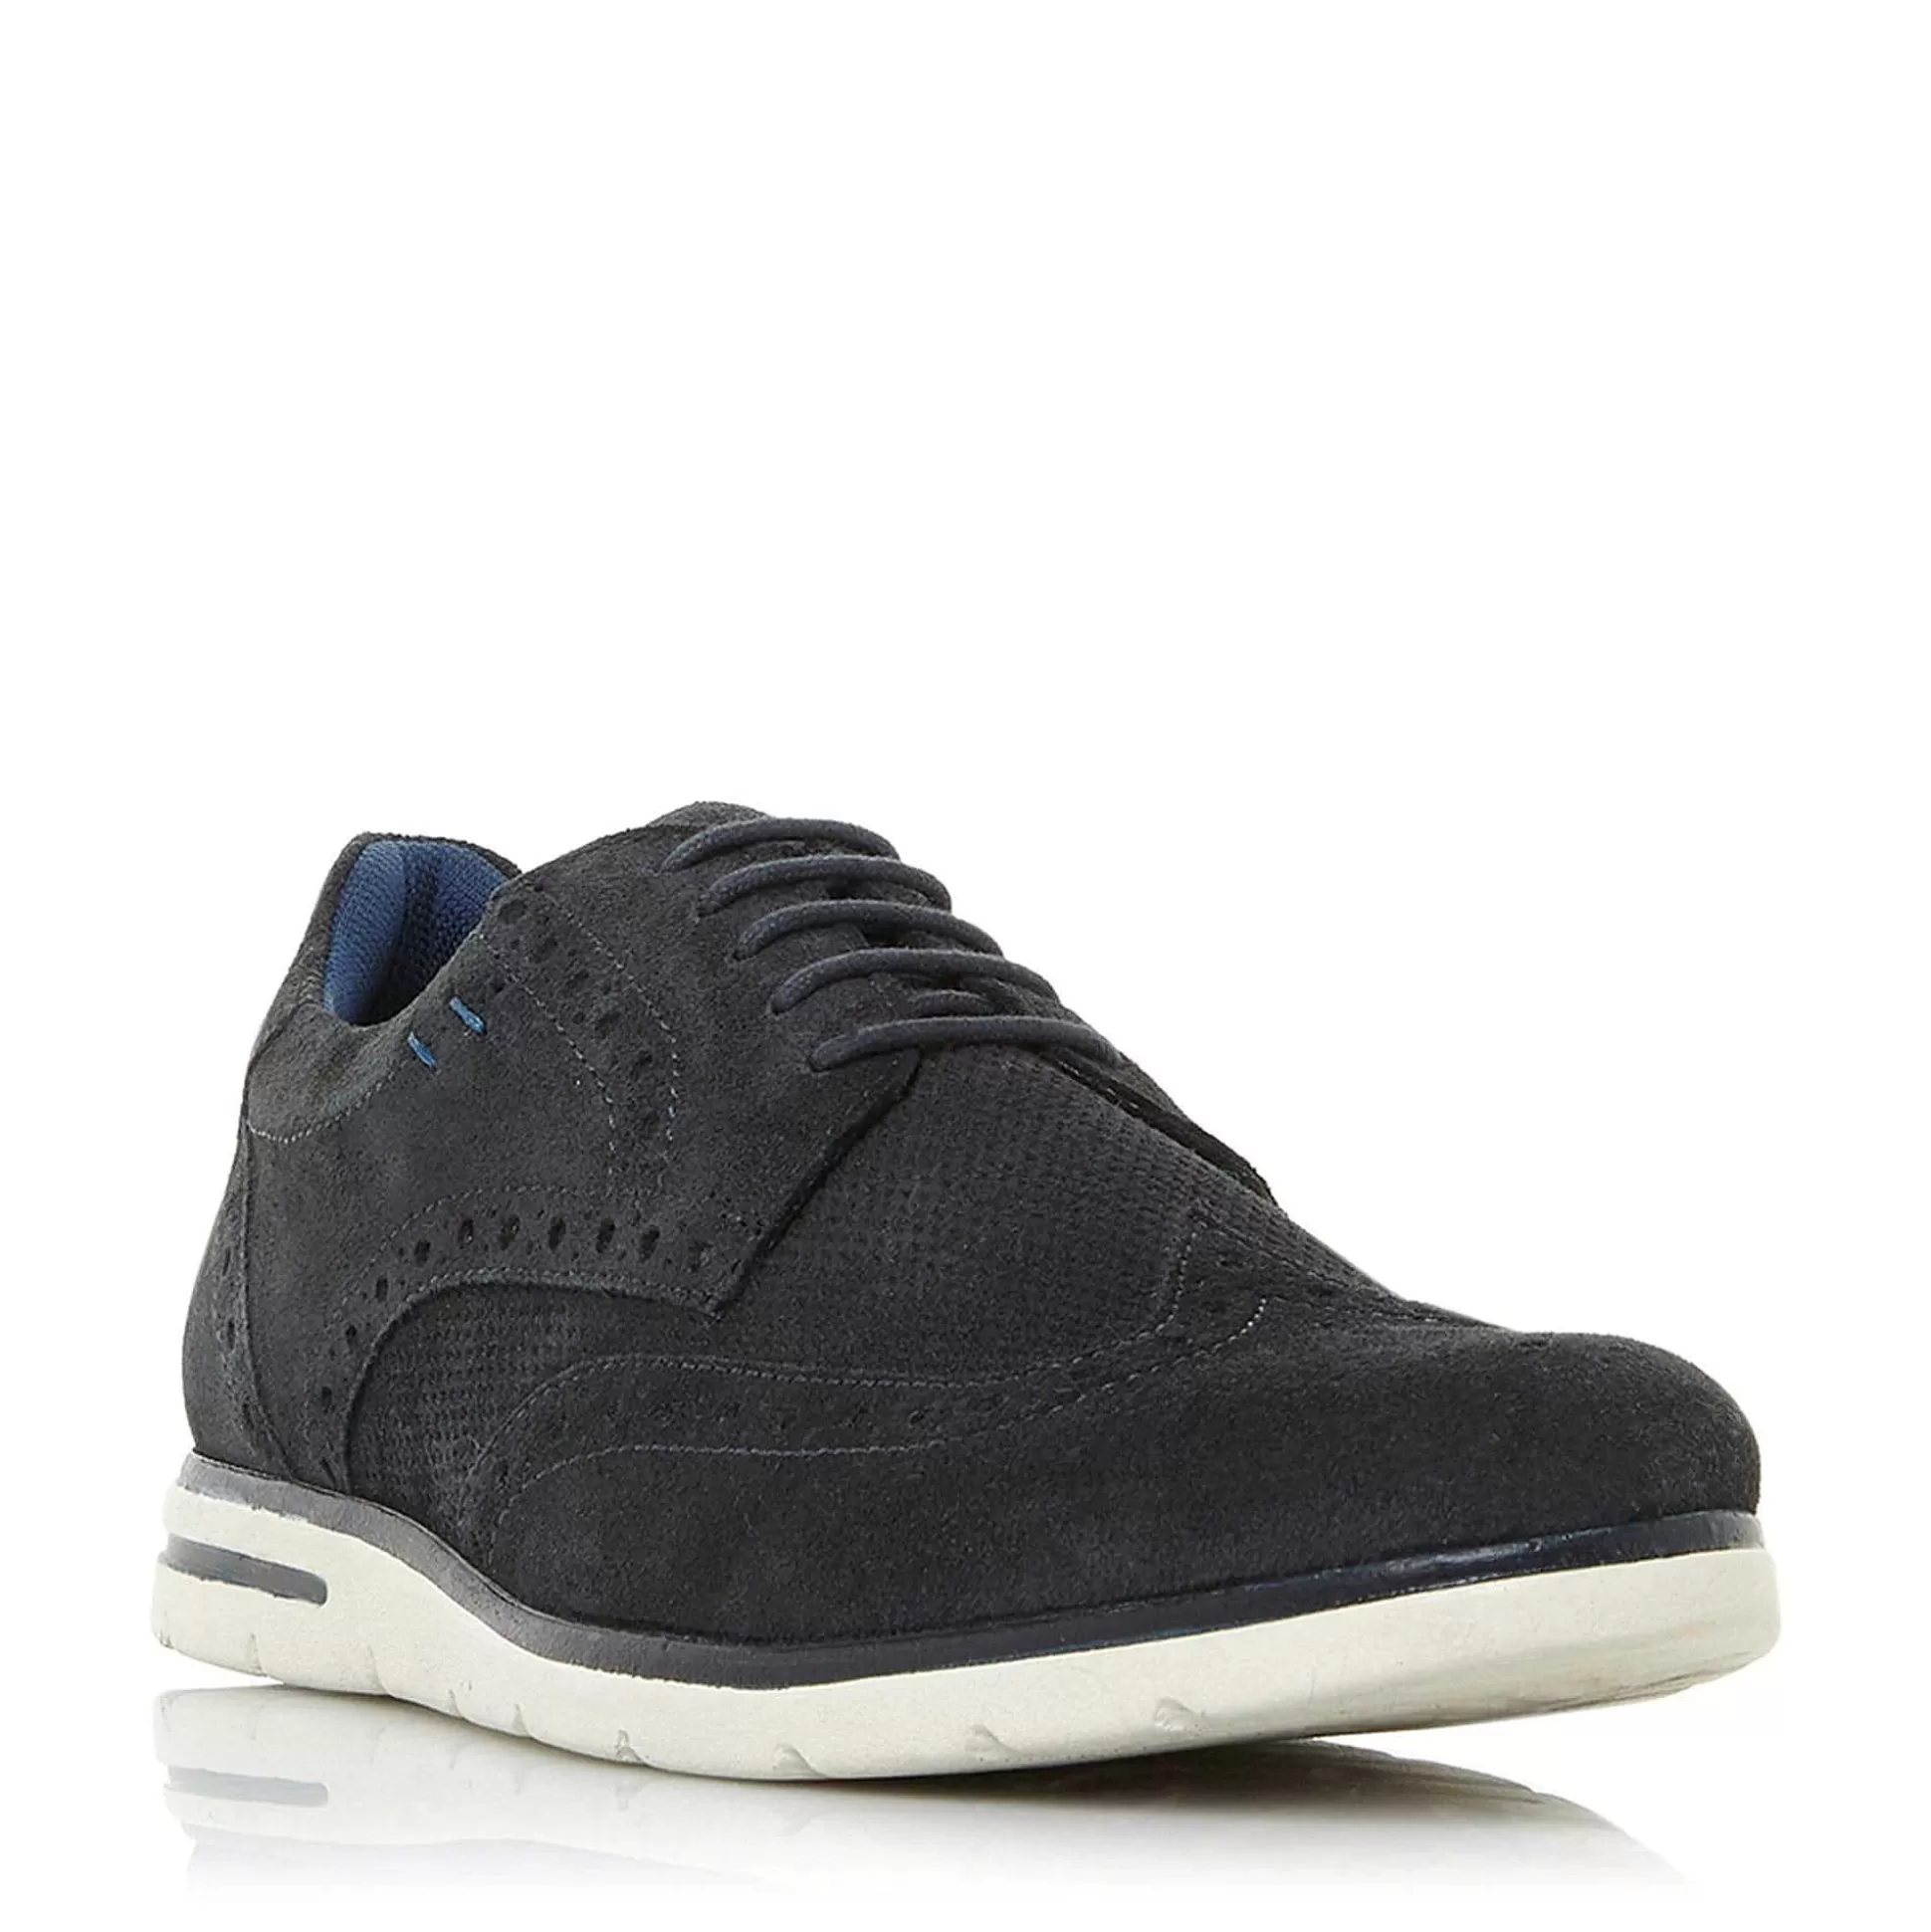 Dune London BARRY - NAVY-Men Casual Shoes | Brogues